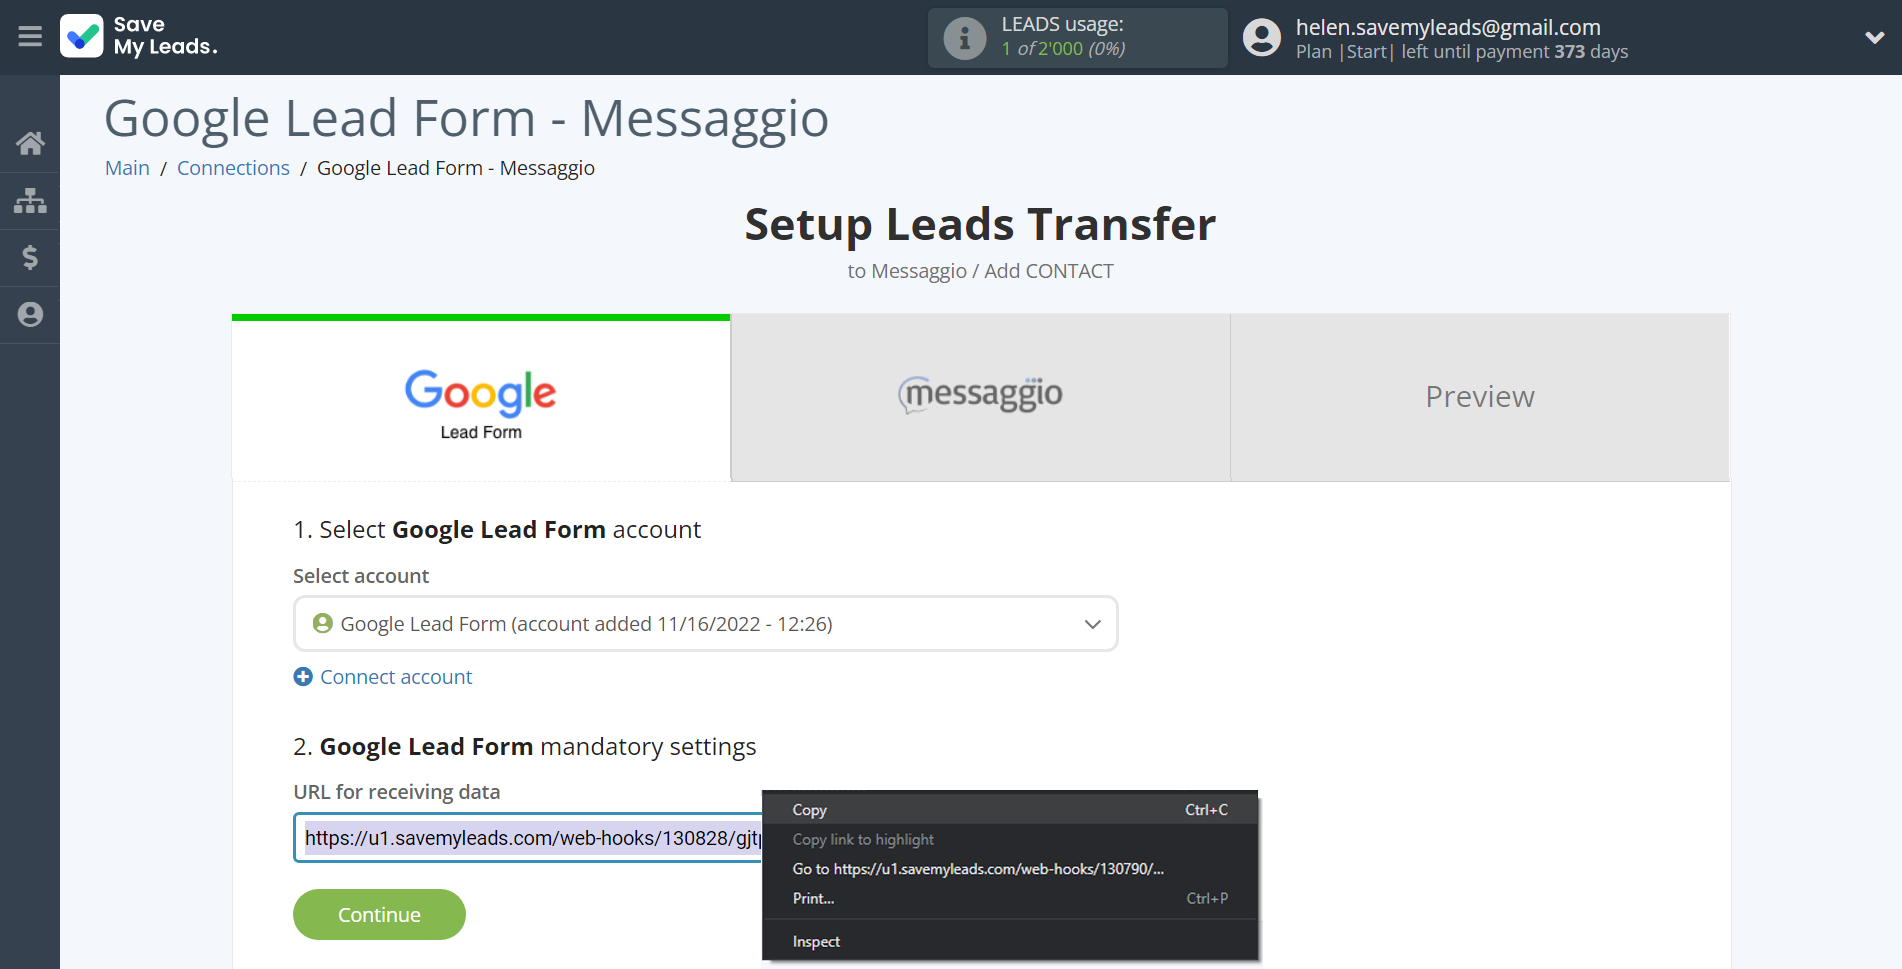 How to Connect Google Lead Form with Messaggio | Data Source account connection